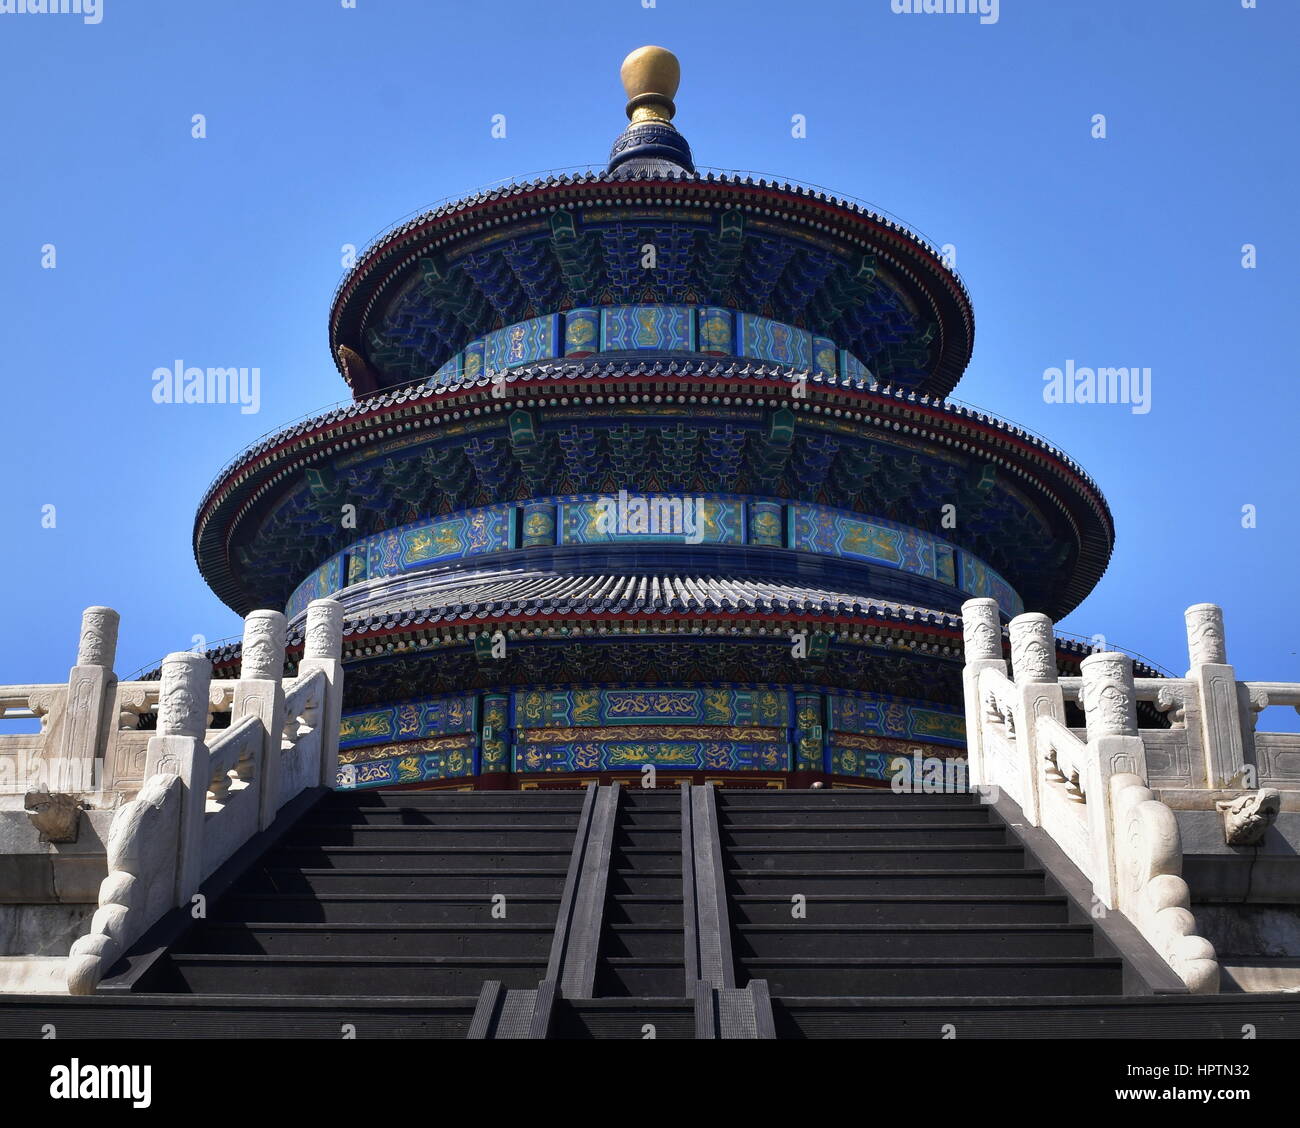 Ascending stairs to Temple of Heaven altar in Beijing, China - no people Stock Photo